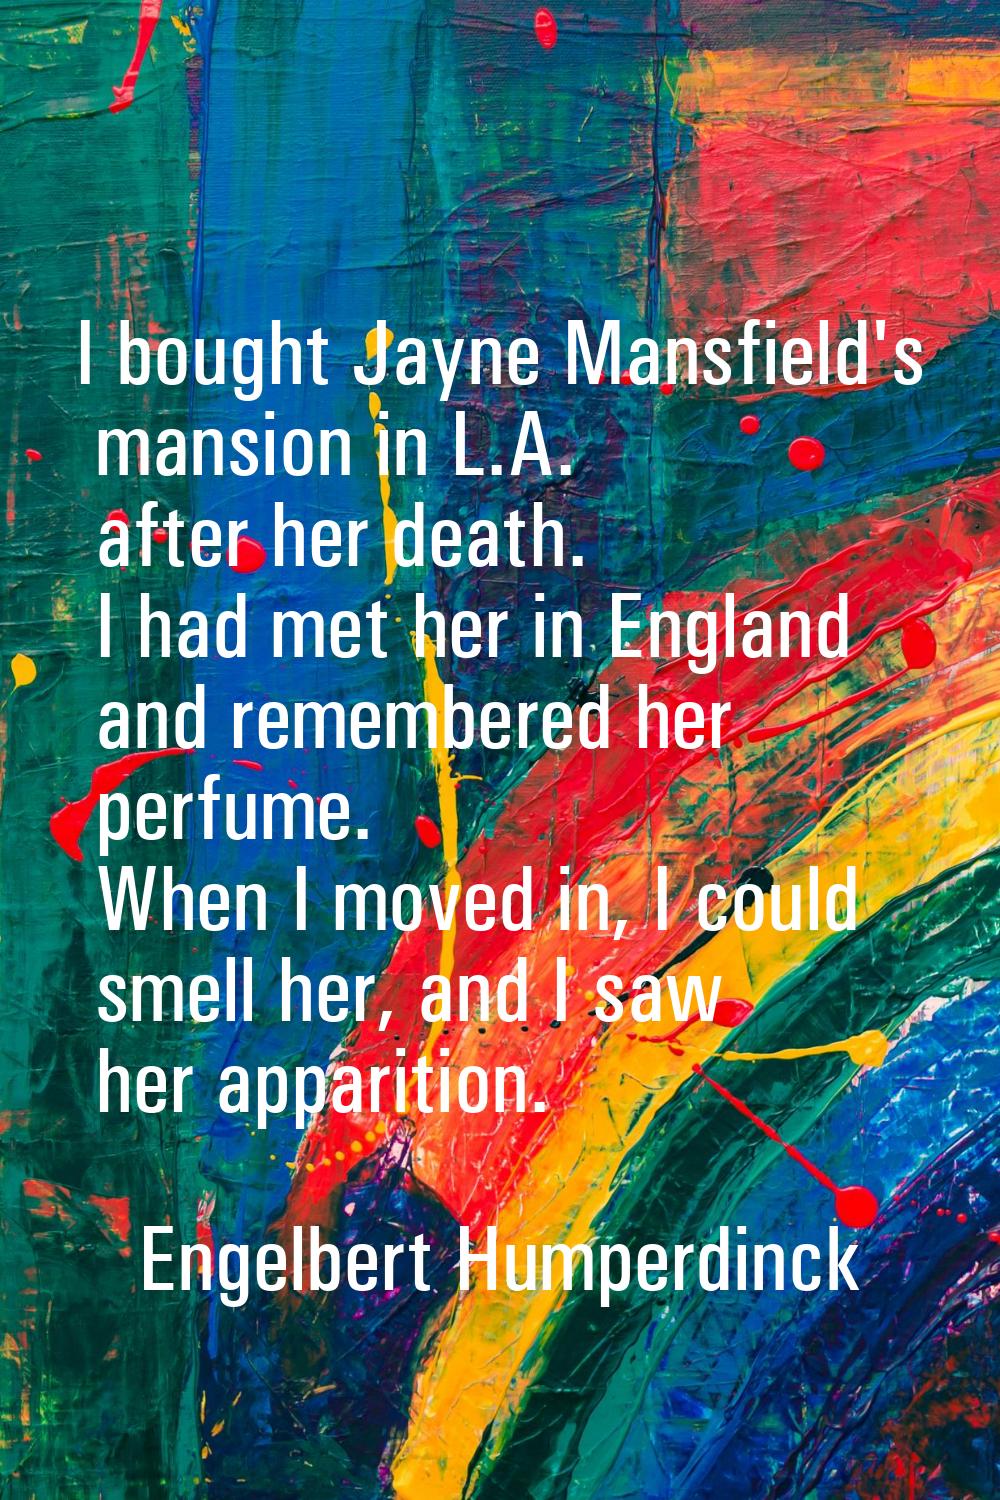 I bought Jayne Mansfield's mansion in L.A. after her death. I had met her in England and remembered